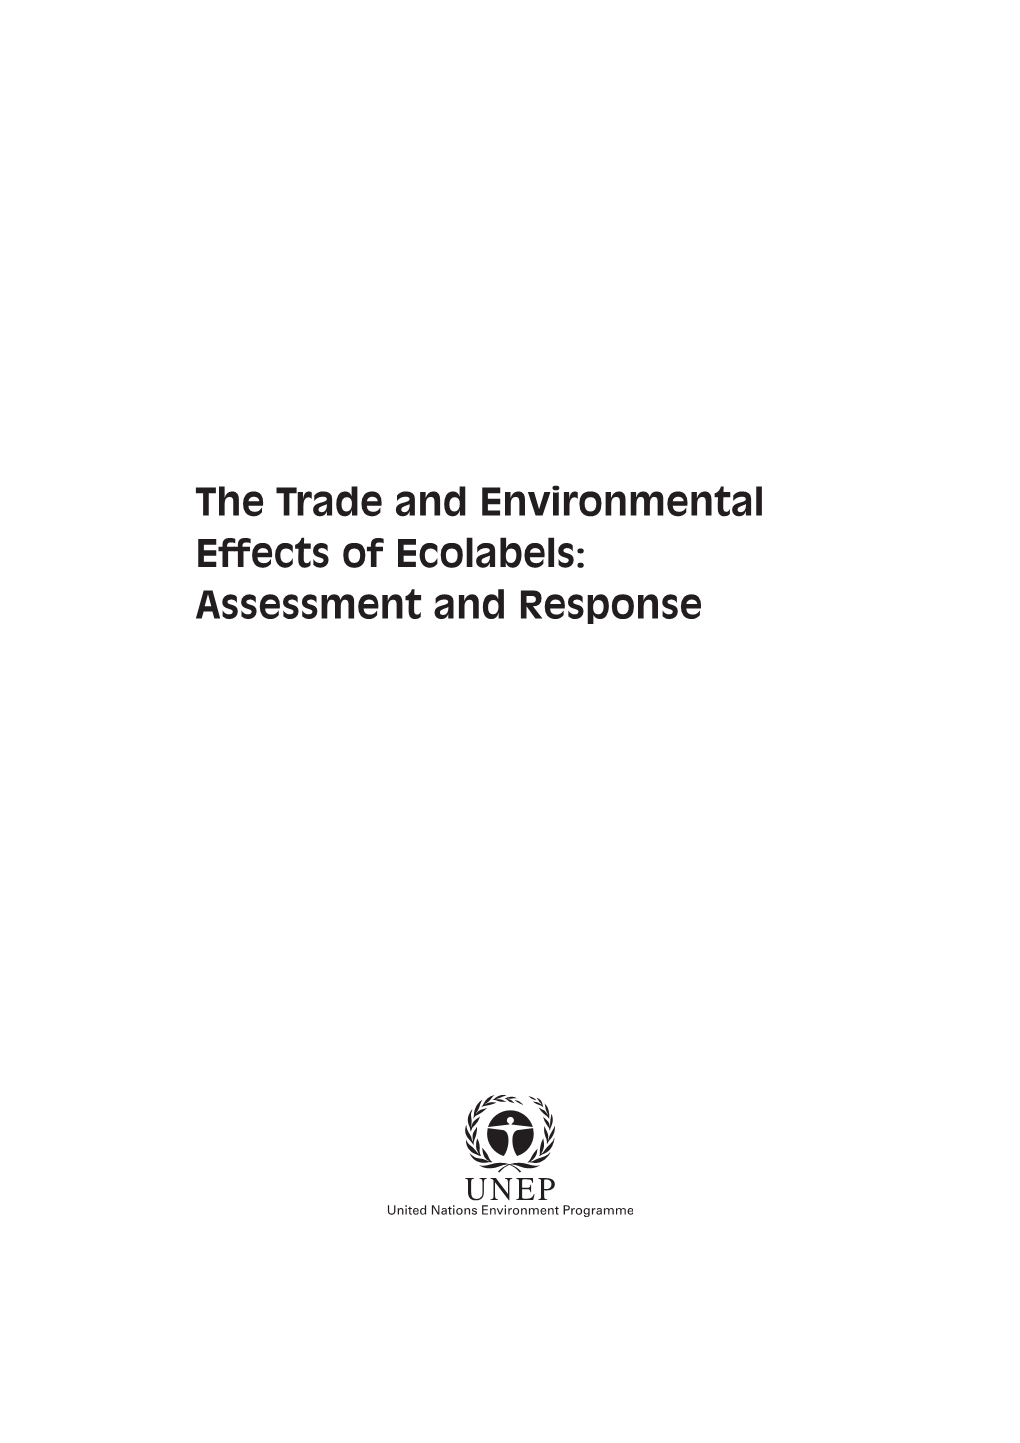 The Trade and Environmental Effects of Ecolabels: Assessment and Response Page De Garde 14/10/05 11:34 Page 2 I-X Aknowledgements 14/10/05 11:50 Page I